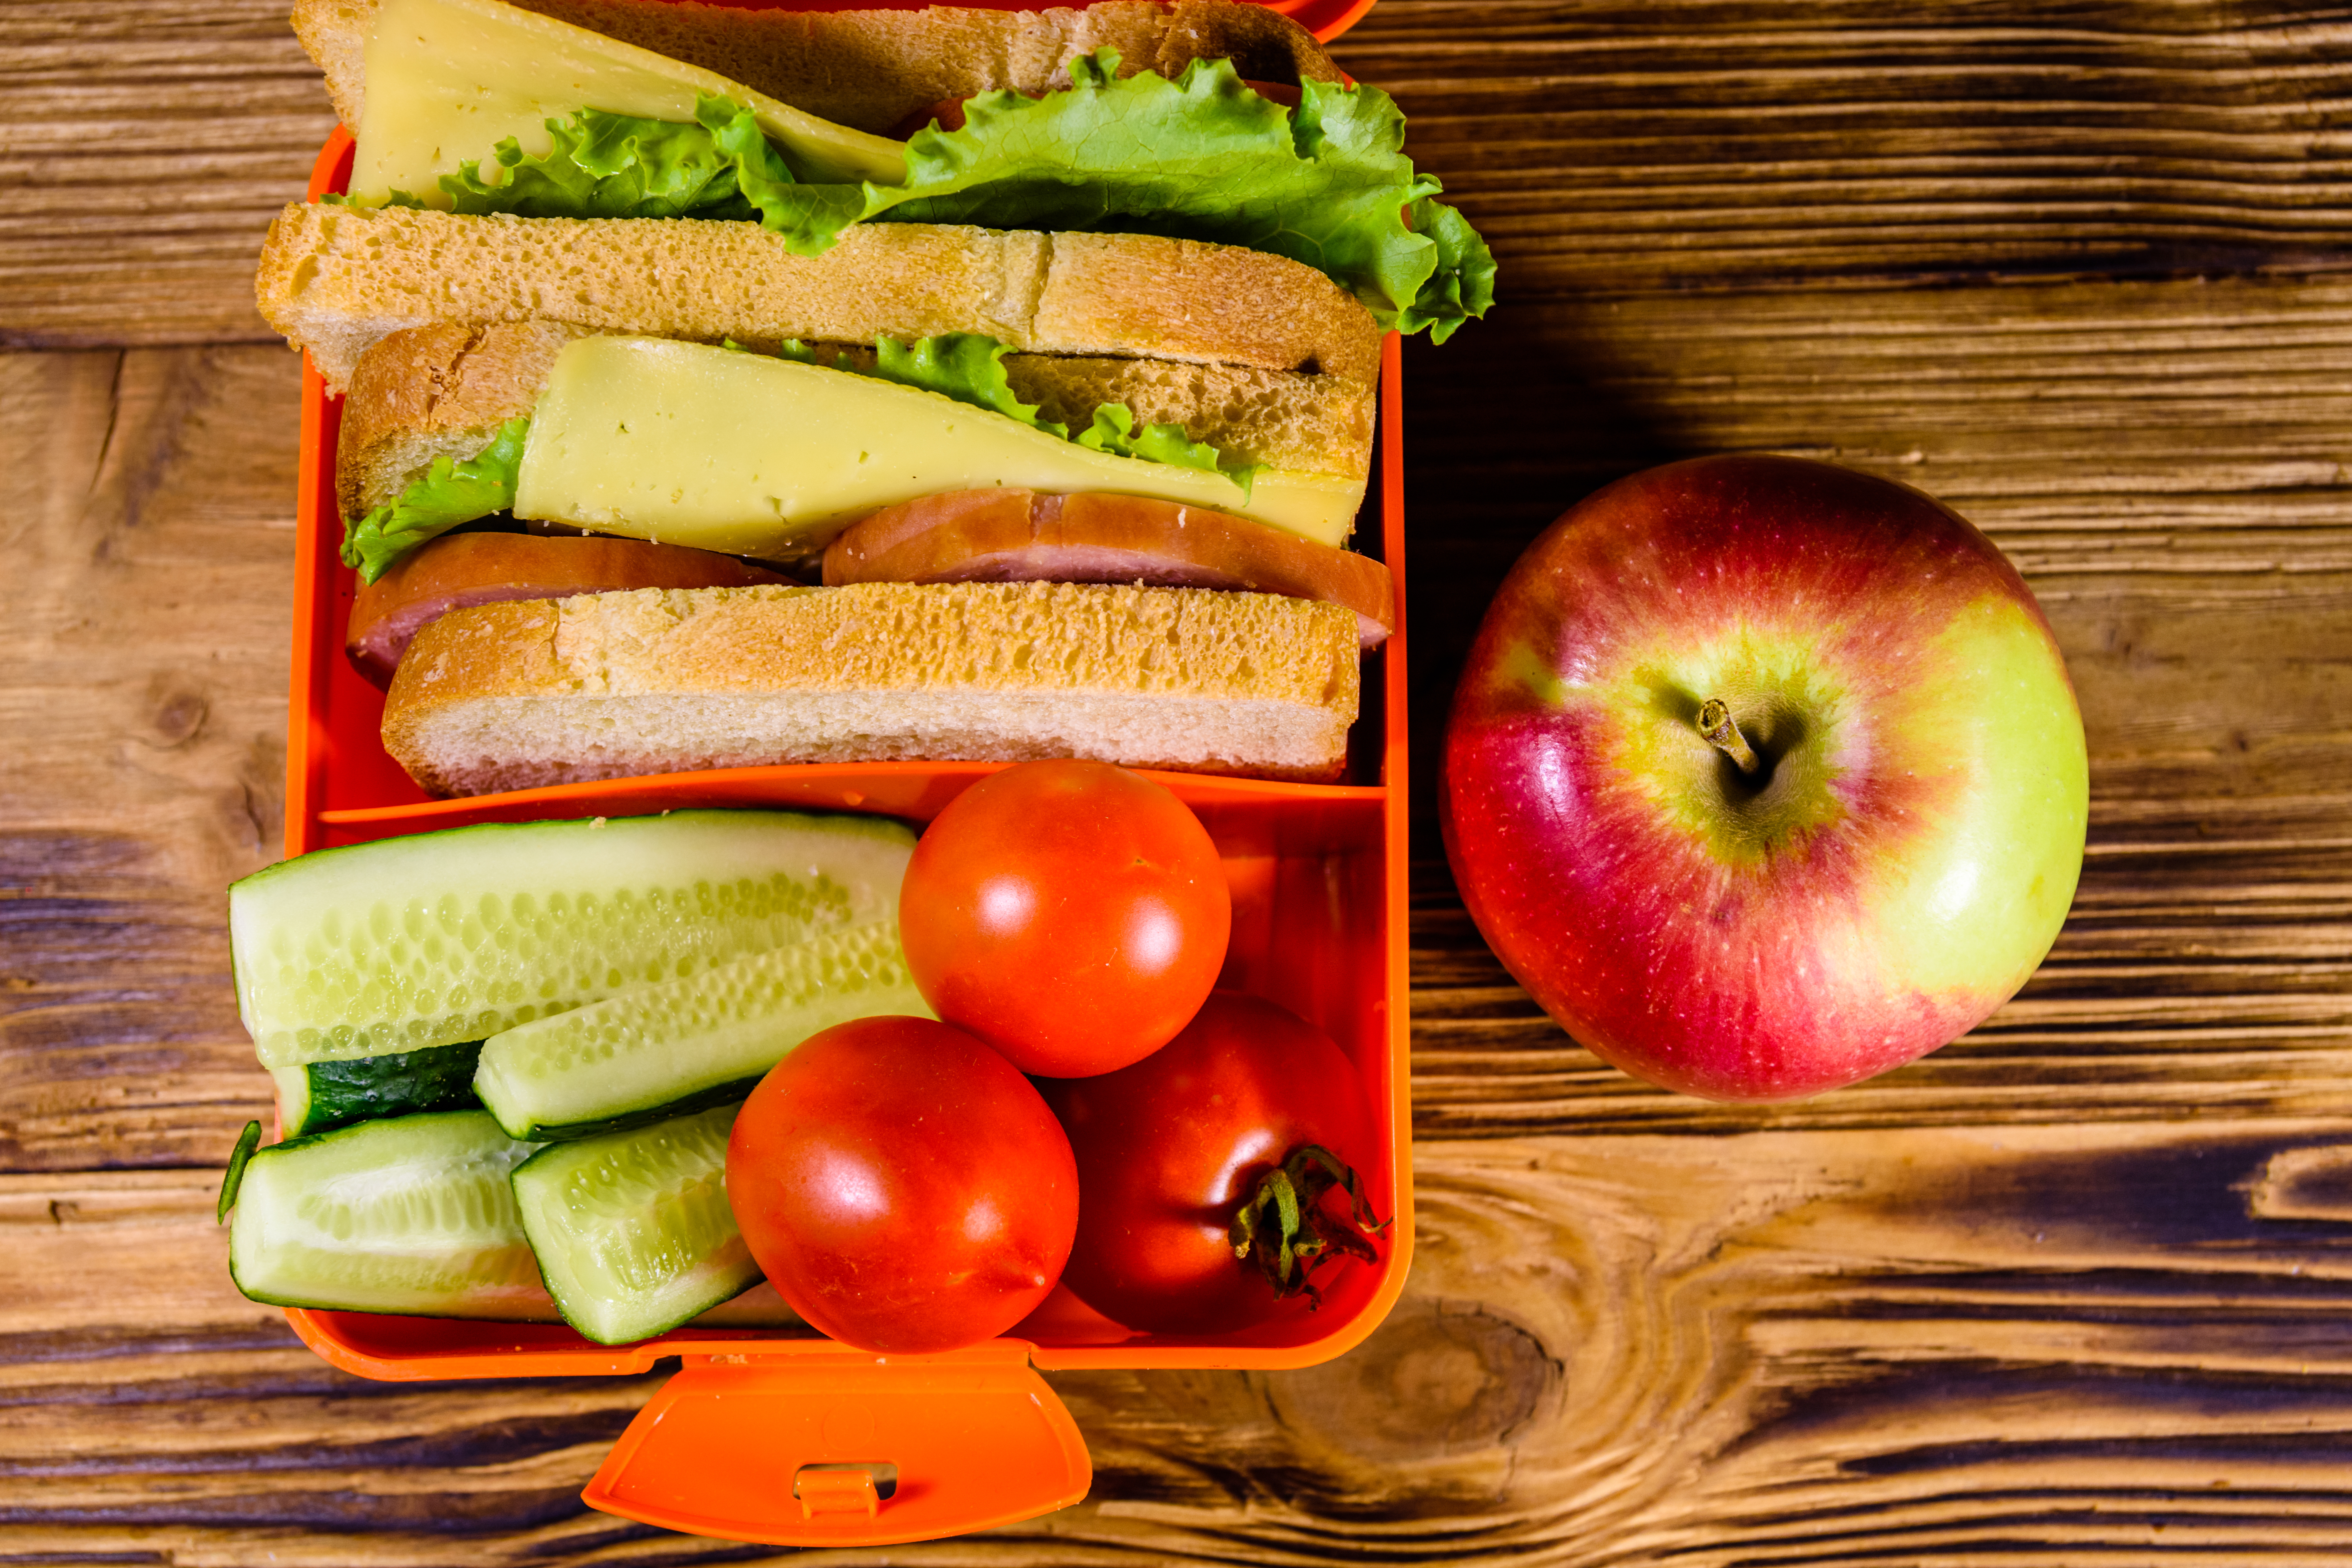 The registered dietitian can help your student find a healthy way of eating that meets their needs.